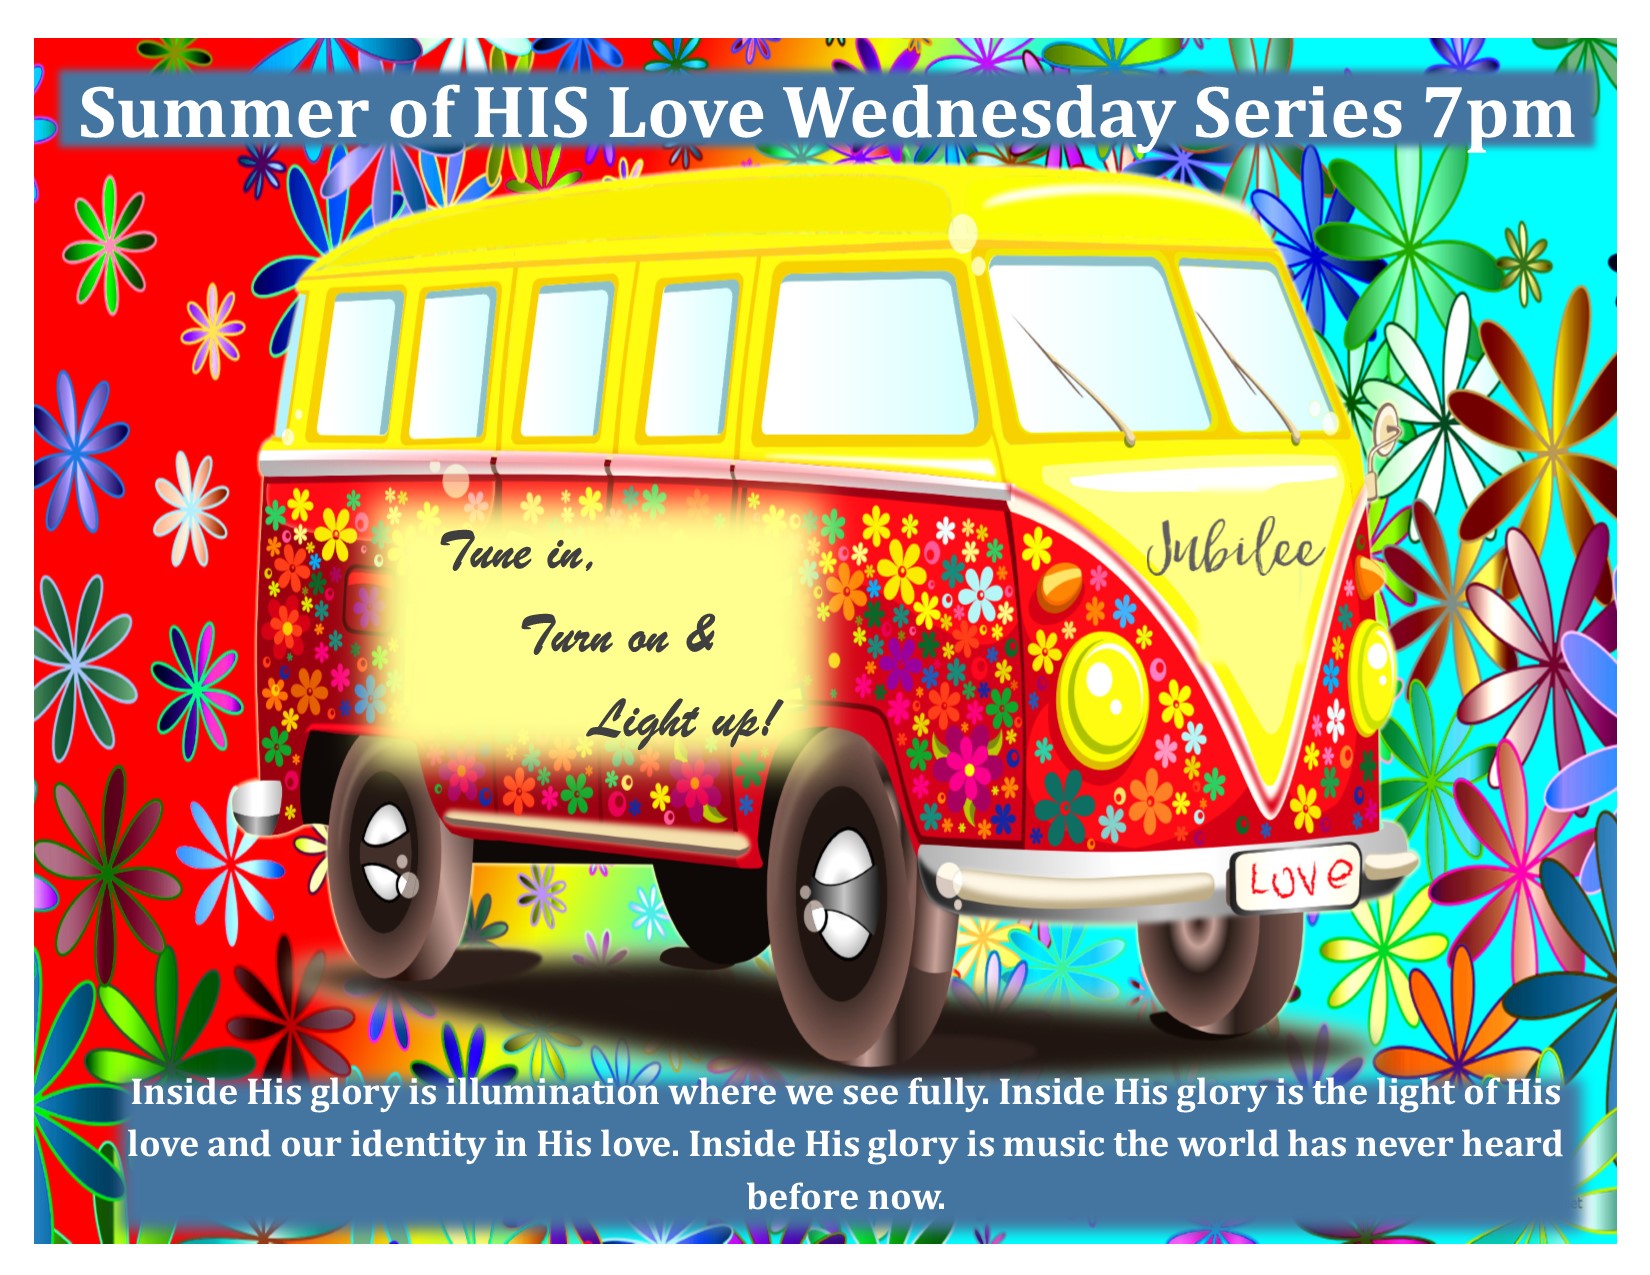 Summer of HIS Love – Wednesday Series